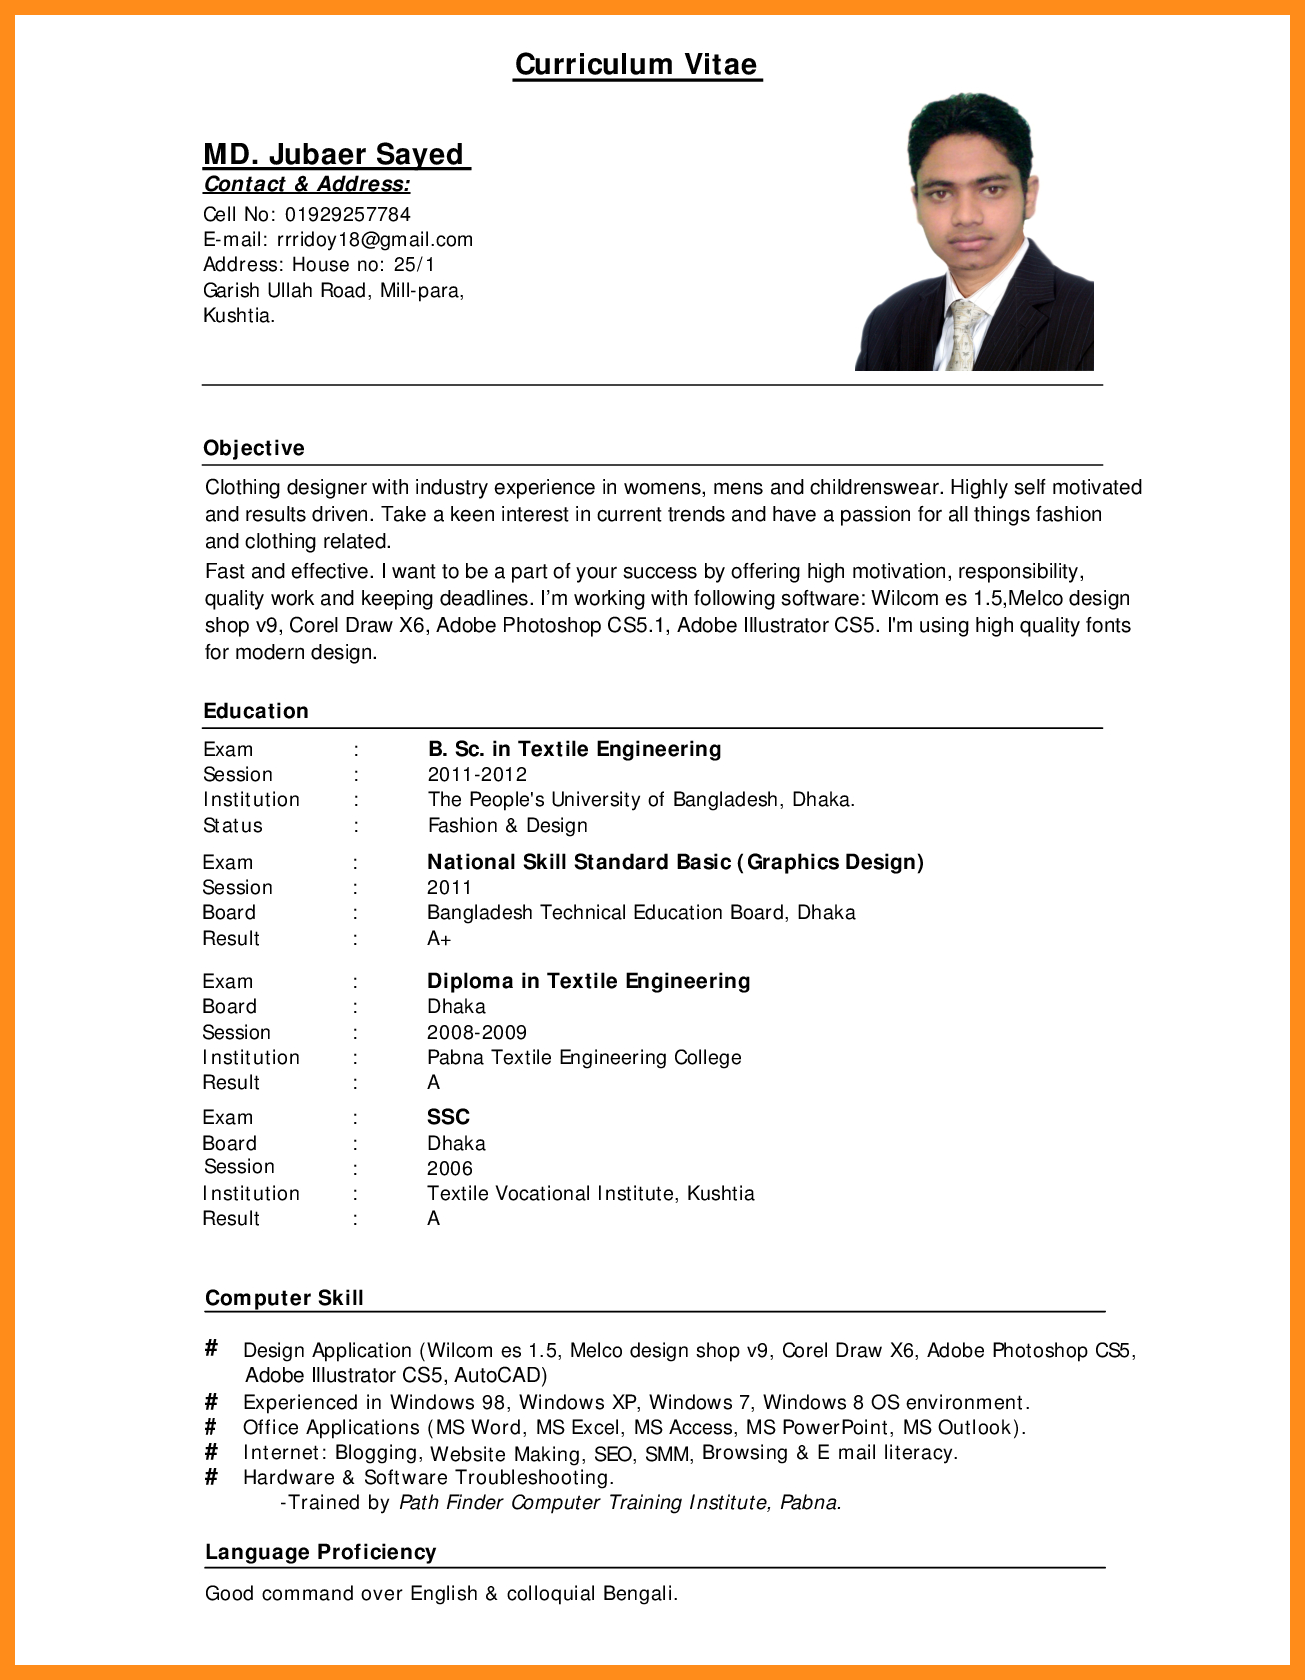 Example Of A Resume Computer Literate Resume Examples Job Resume Samples Pdf Example Resume Computer Skills And Education For Curriculum Vitae example of a resume|wikiresume.com